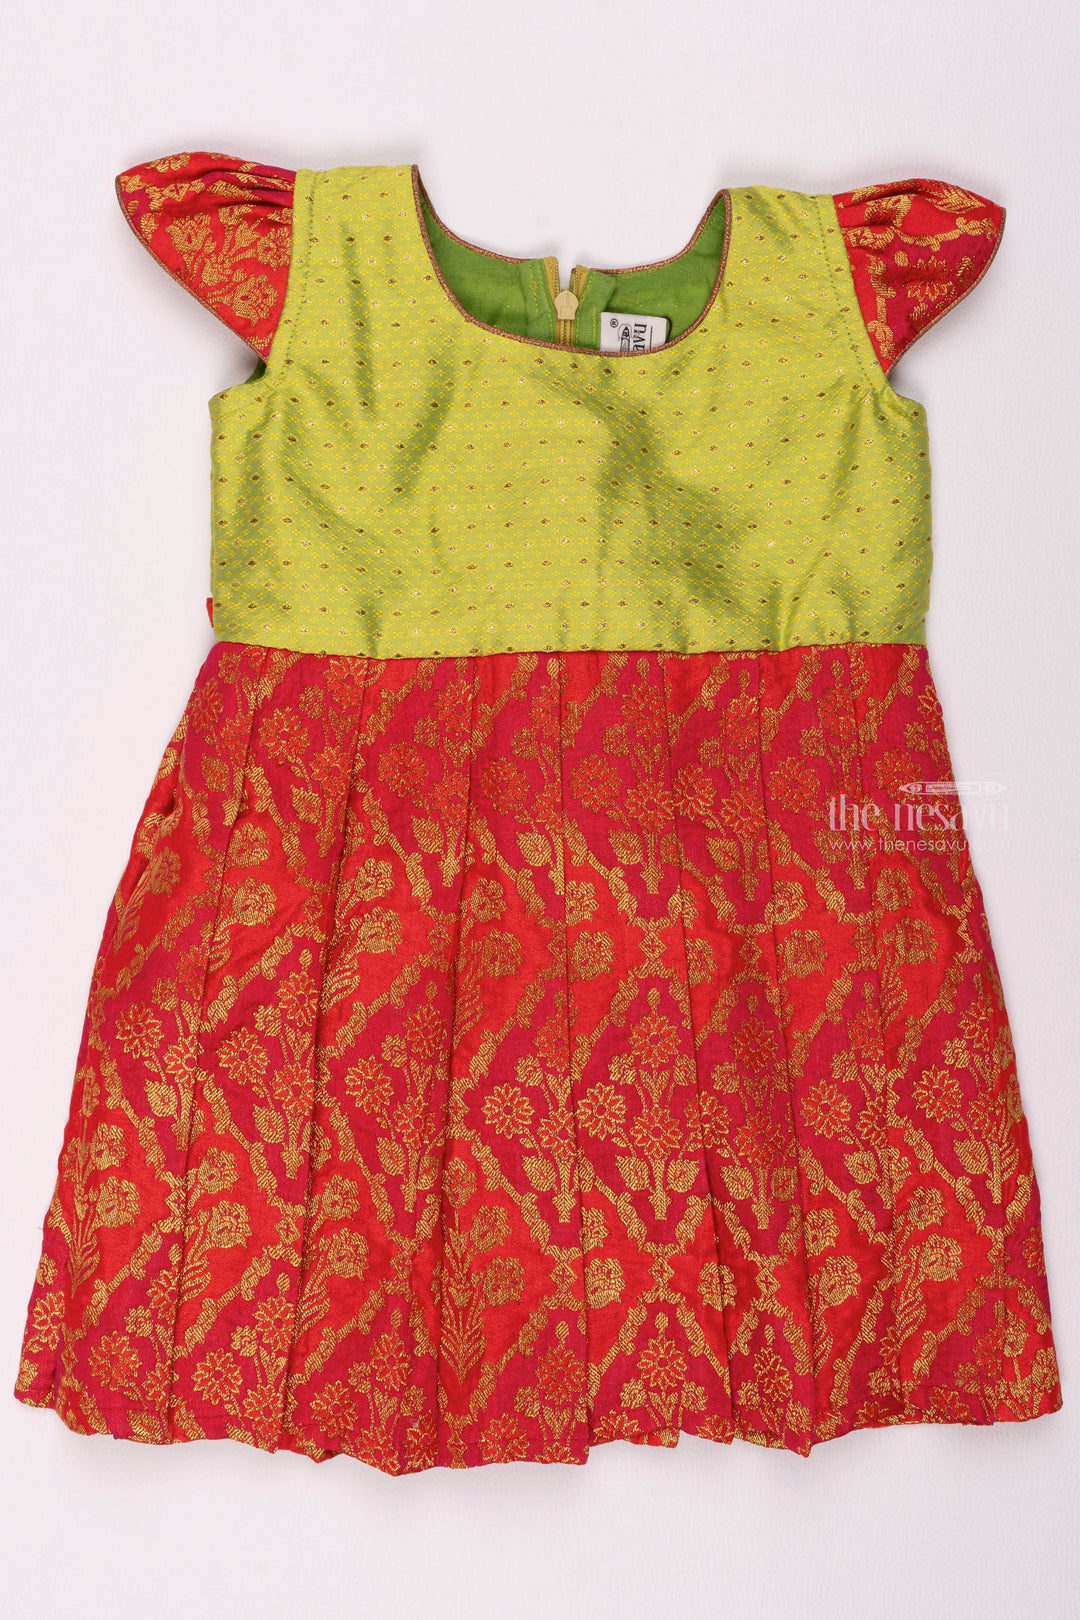 The Nesavu Silk Frock Ruby Red Floral Pleated Ensemble with Verdant Green Yoke Blossoming Elegance for Young Divas Nesavu 16 (1Y) / Red / Banarasi SF694-16 Silk Frock Collections for Toddlers | Premium Pattu Gowns | The Nesavu